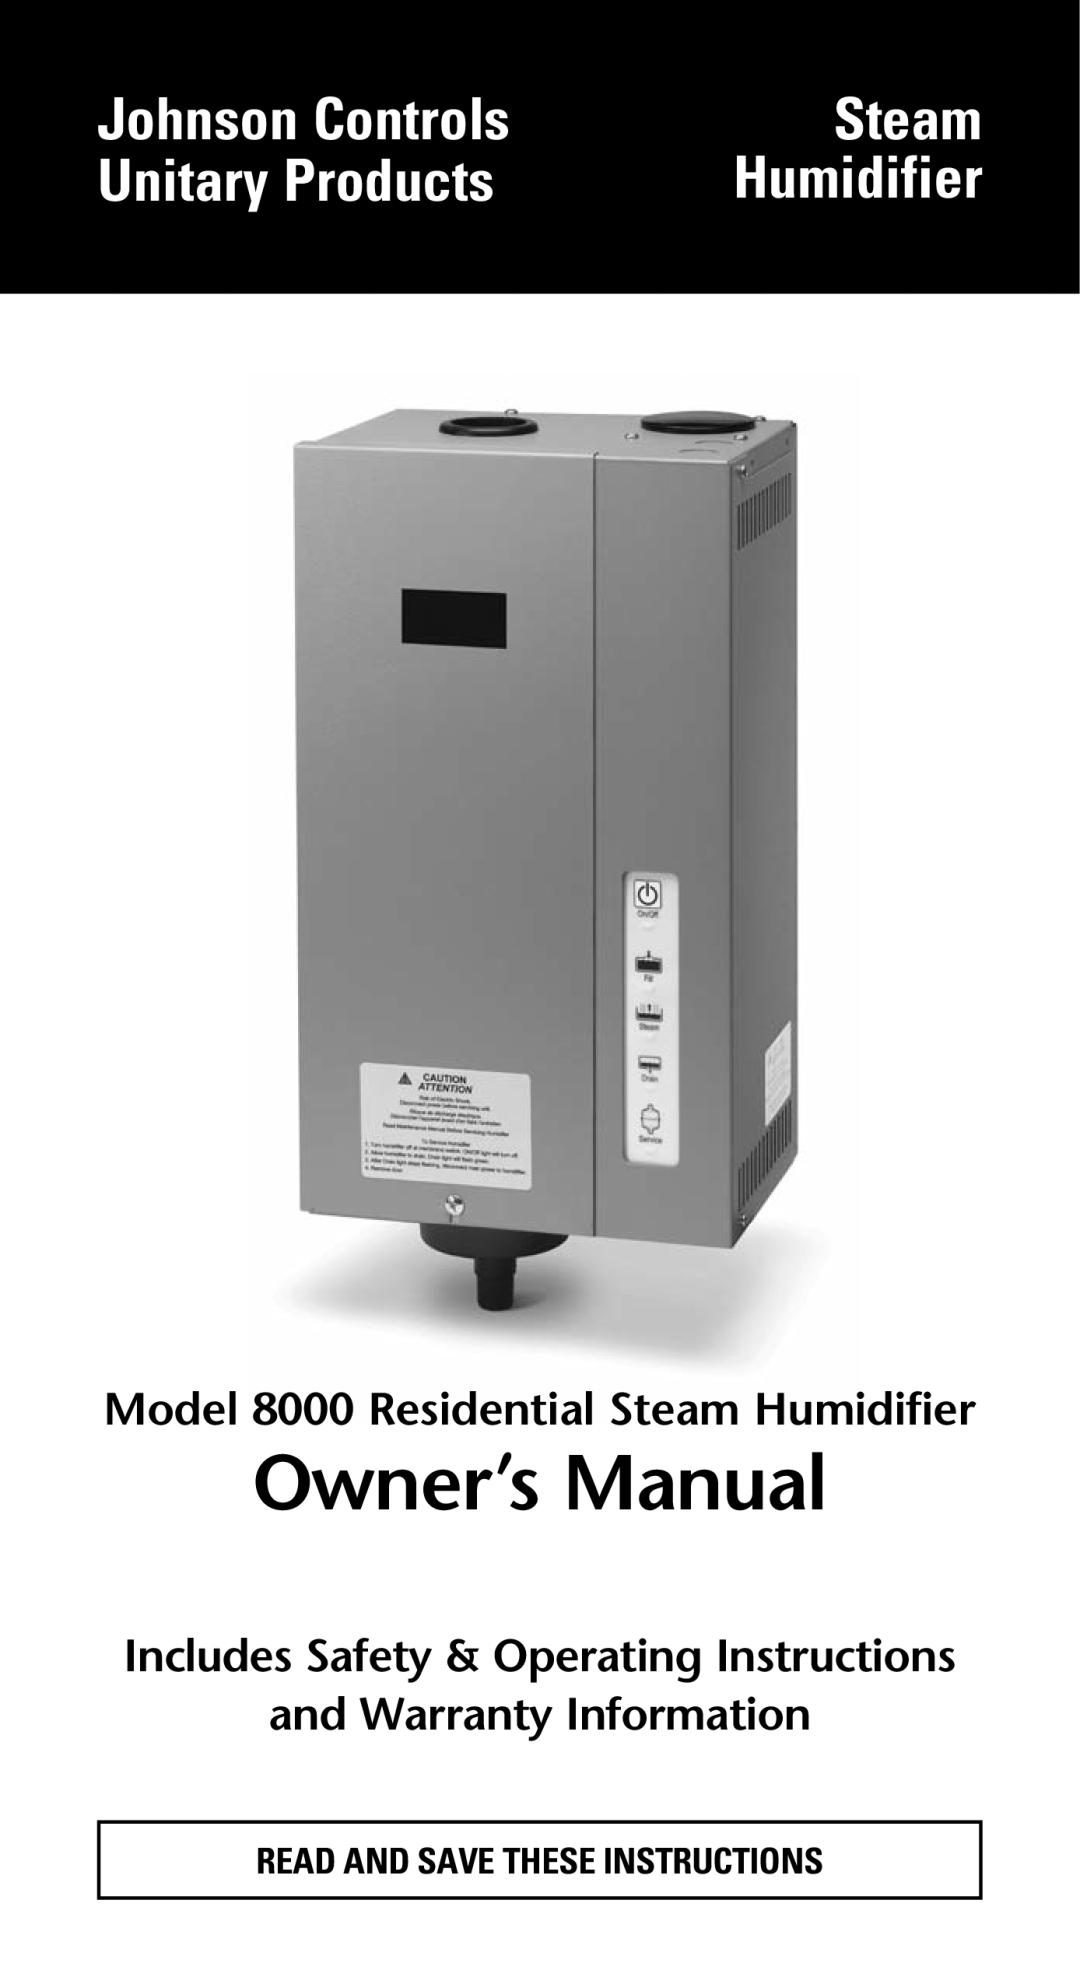 Johnson Controls 5000 dimensions Humidifier Dimensions, Humidifiers for virtually every application, Johnson Controls 